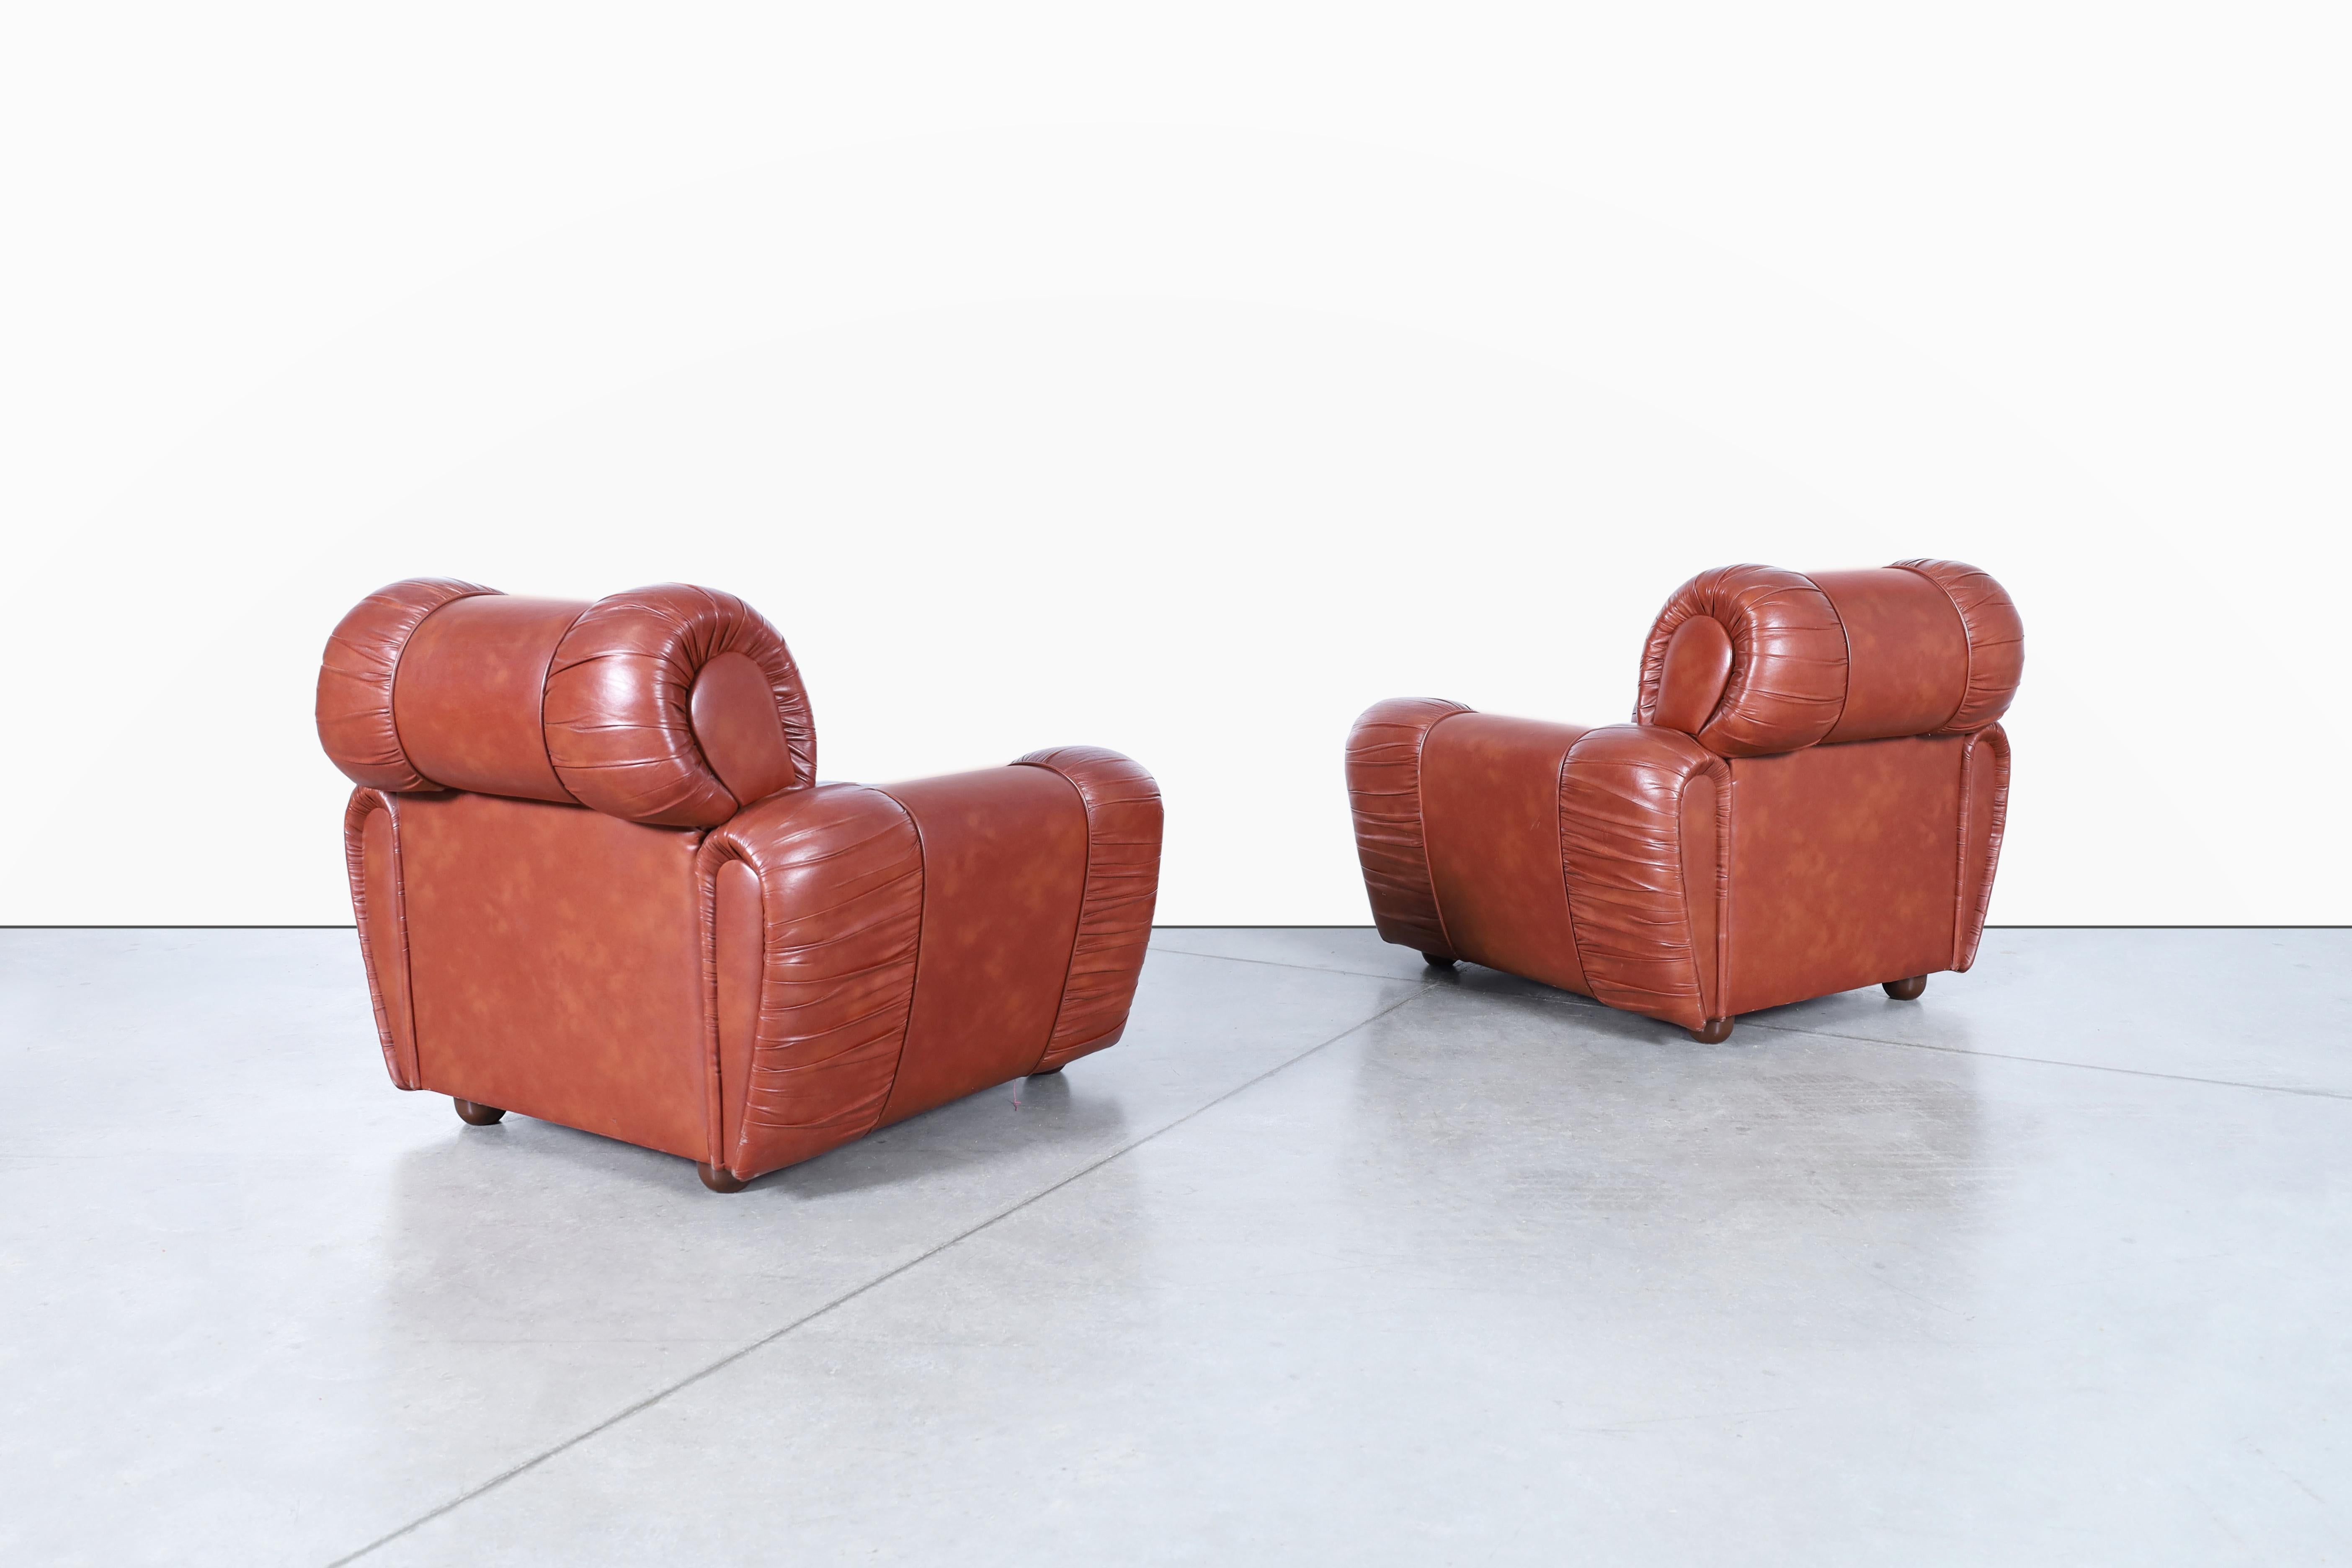 Late 20th Century Vintage Italian Leatherette Lounge Chairs For Sale